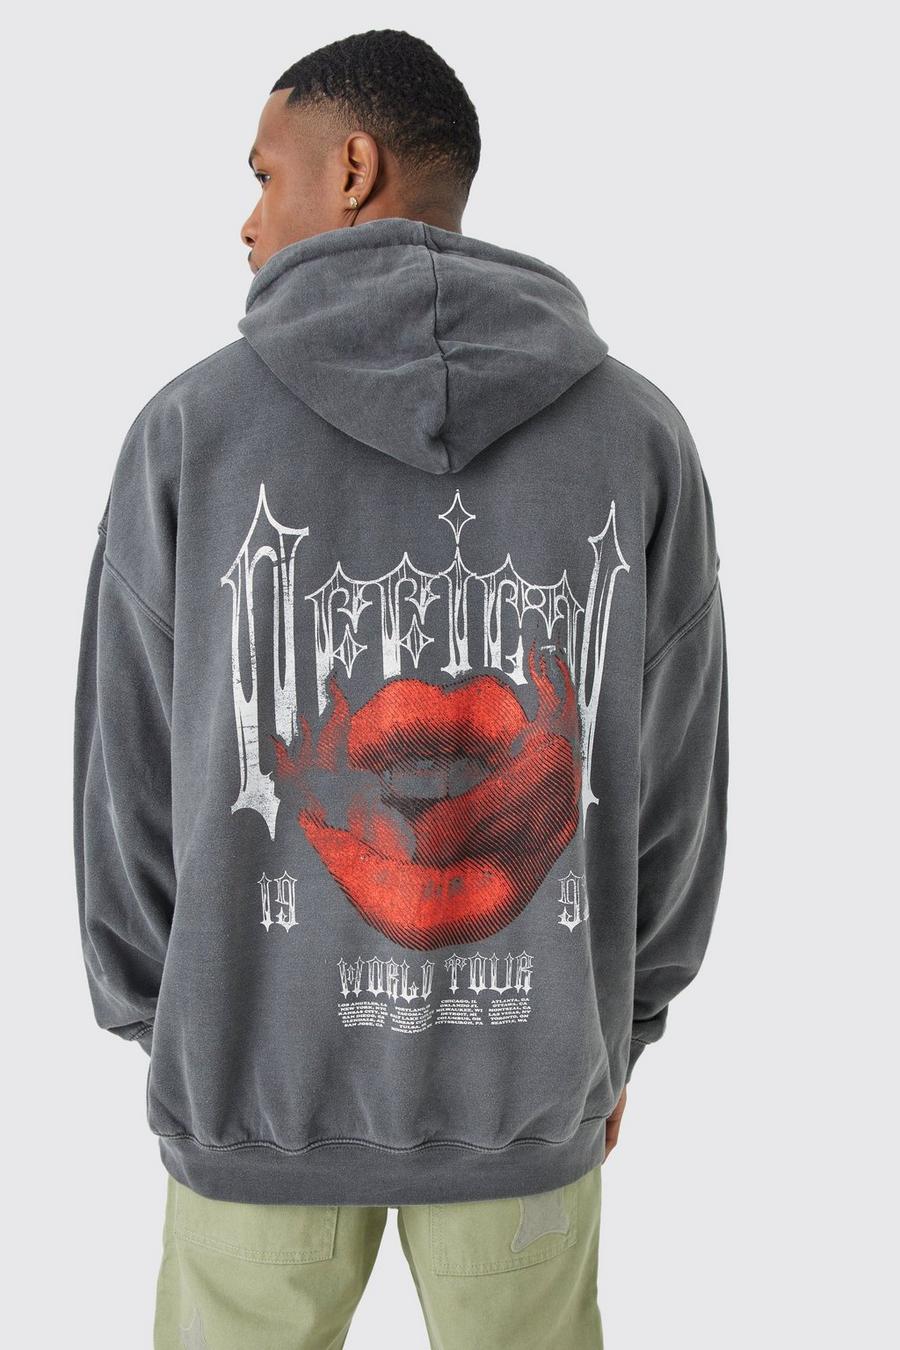 Charcoal grey Oversized Overdyed Gothic Lips Graphic Hoodie